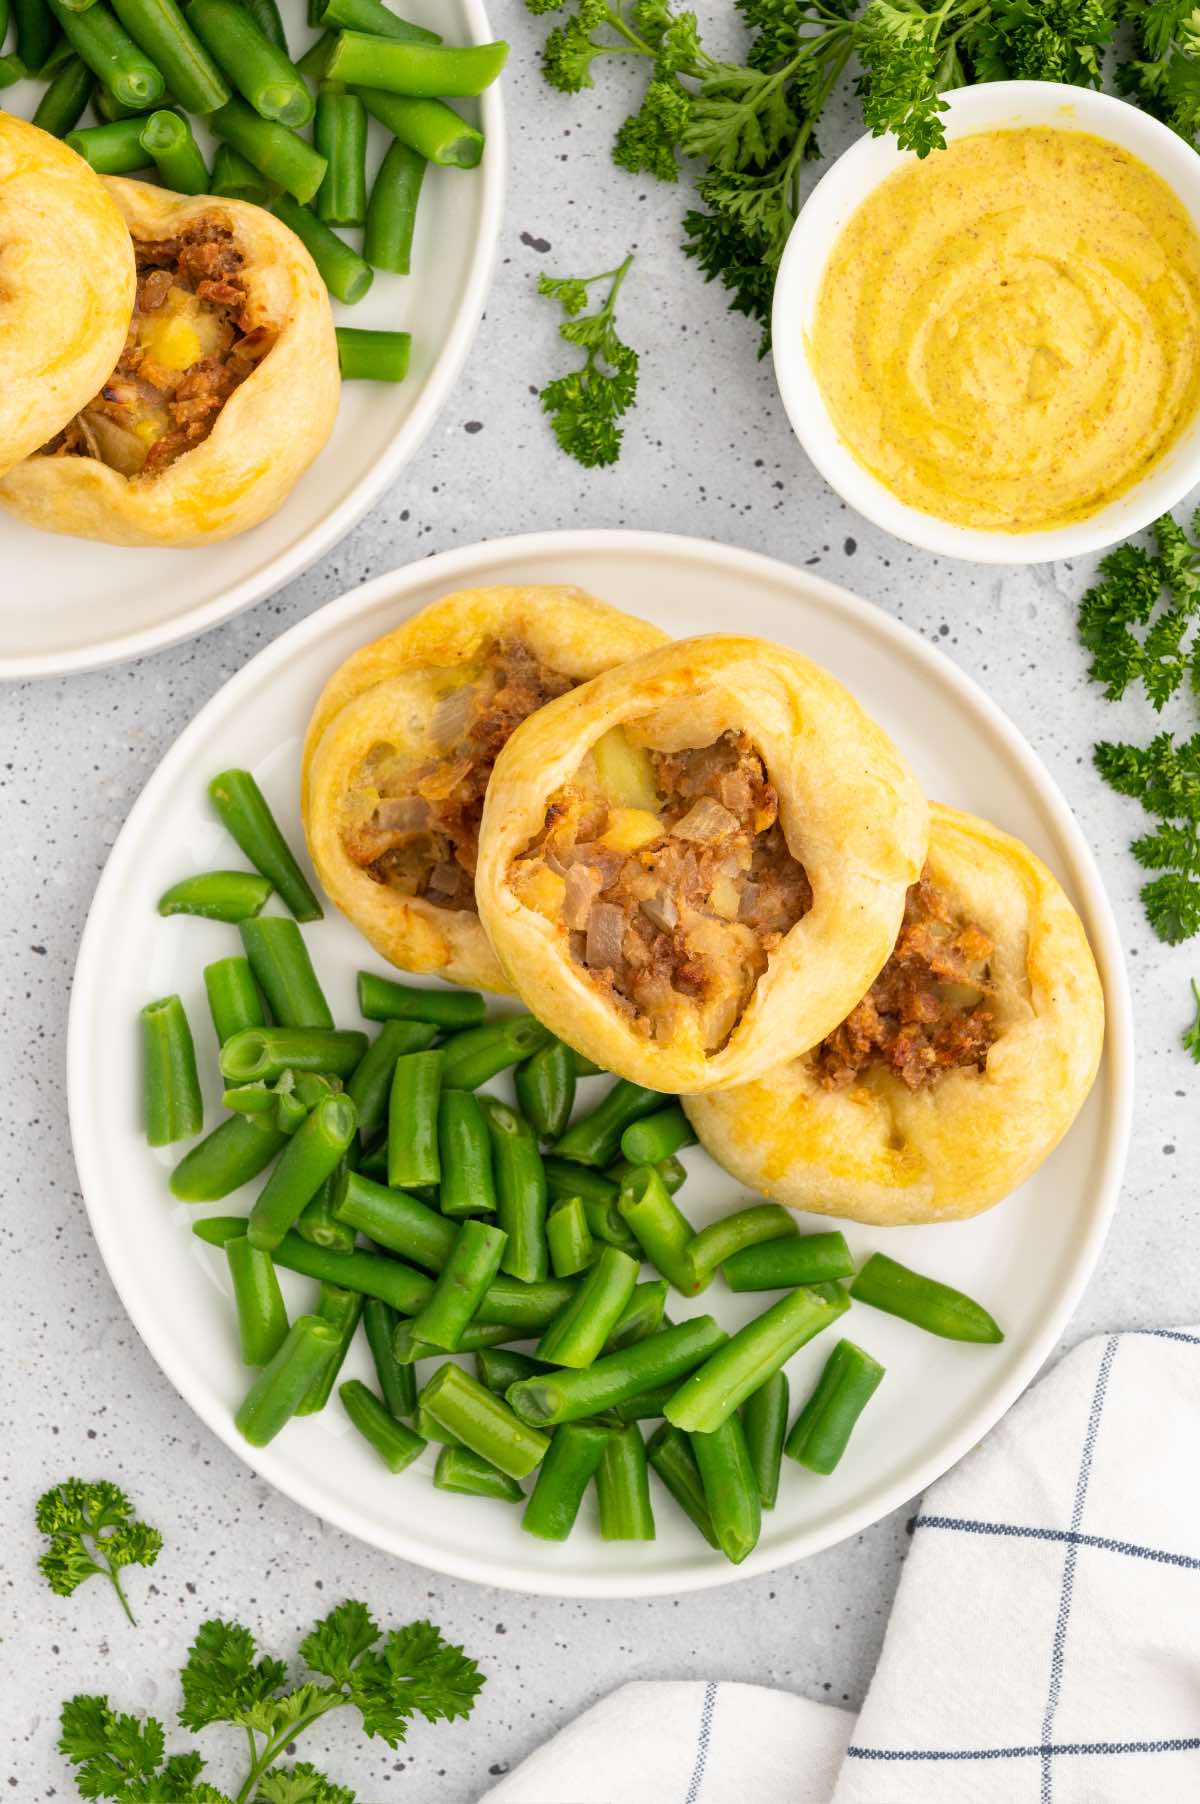 The best homemade potato knish pastries served with green beans and parsley.